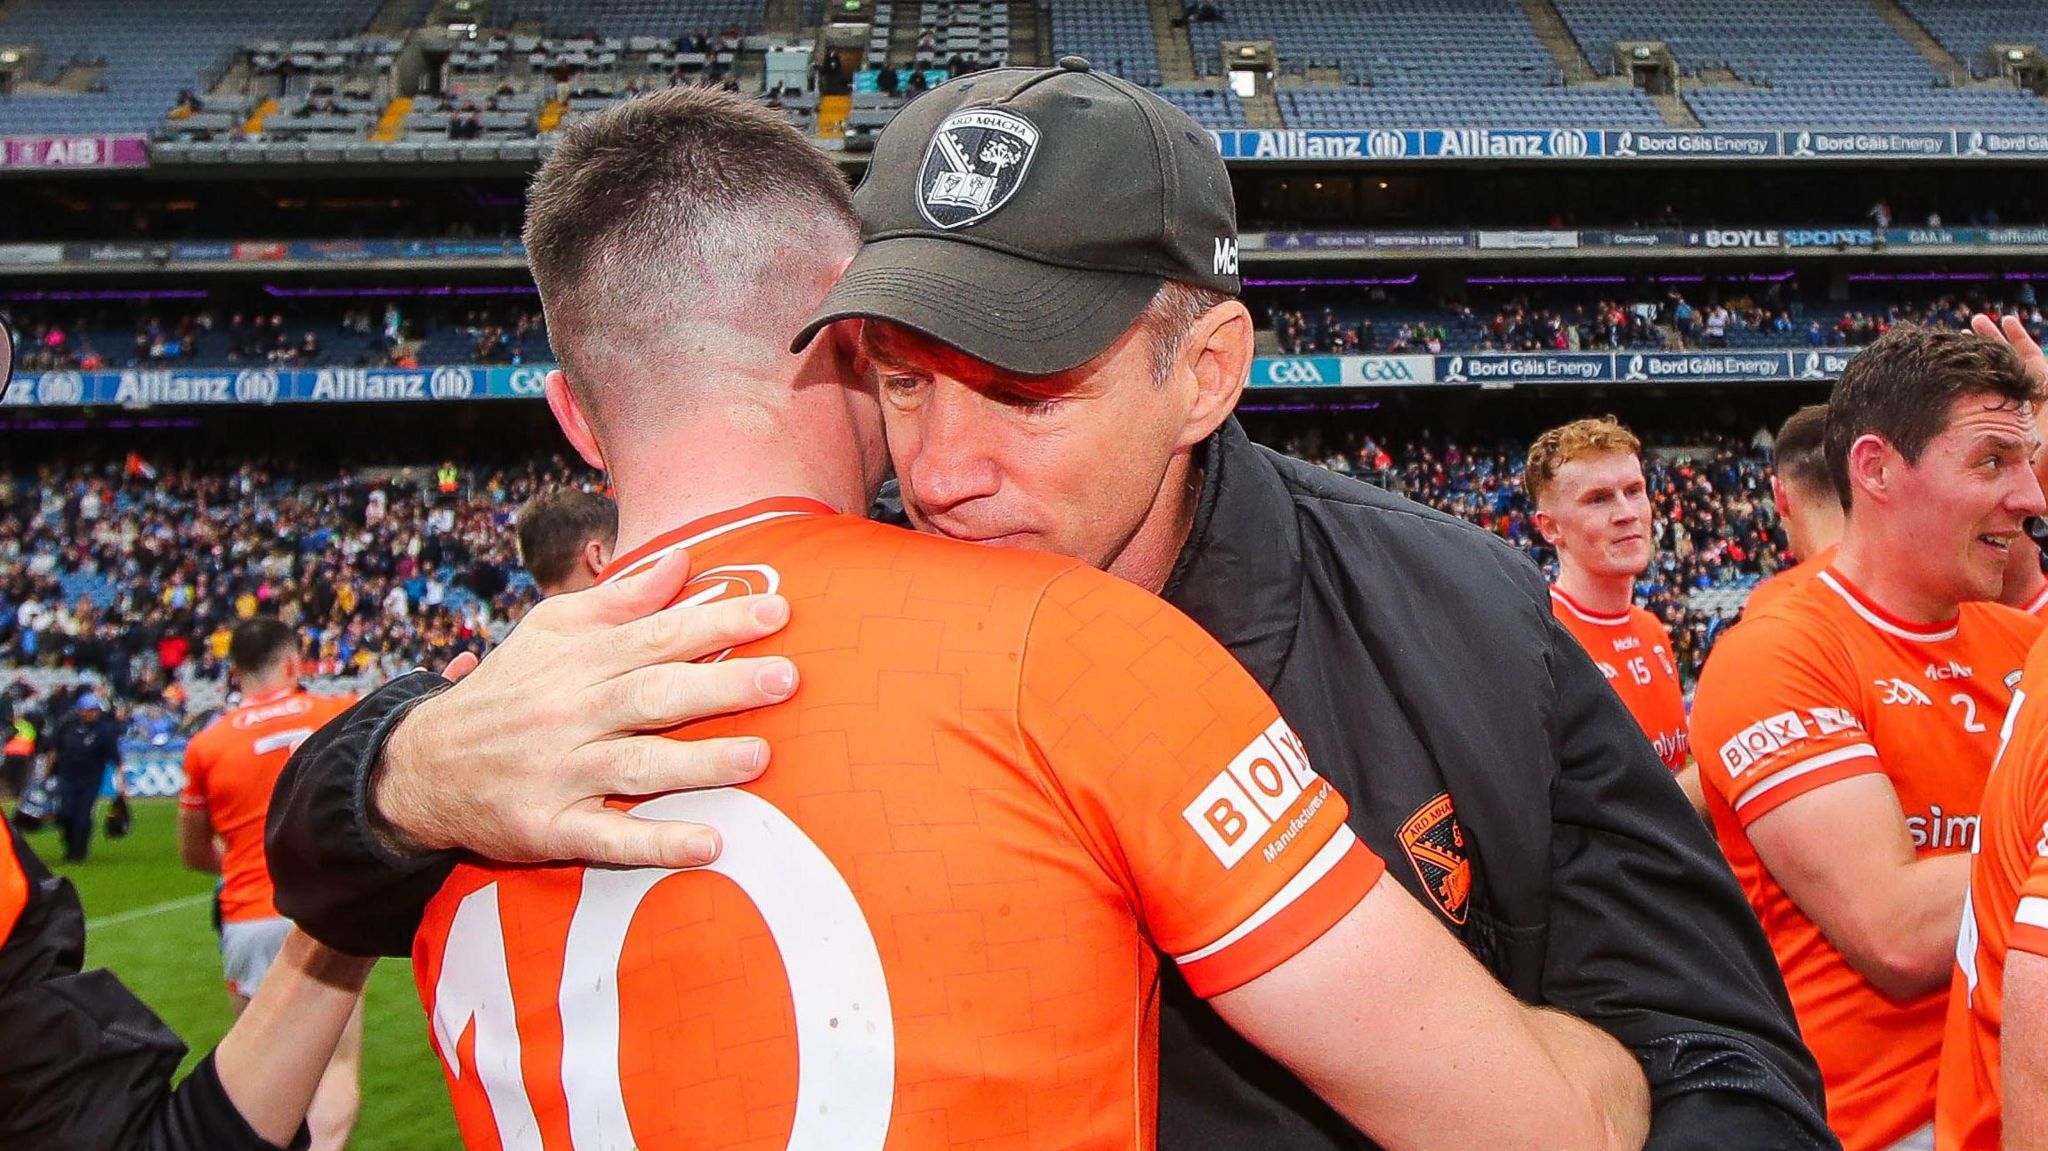 McGeeney and Conaty at full-time